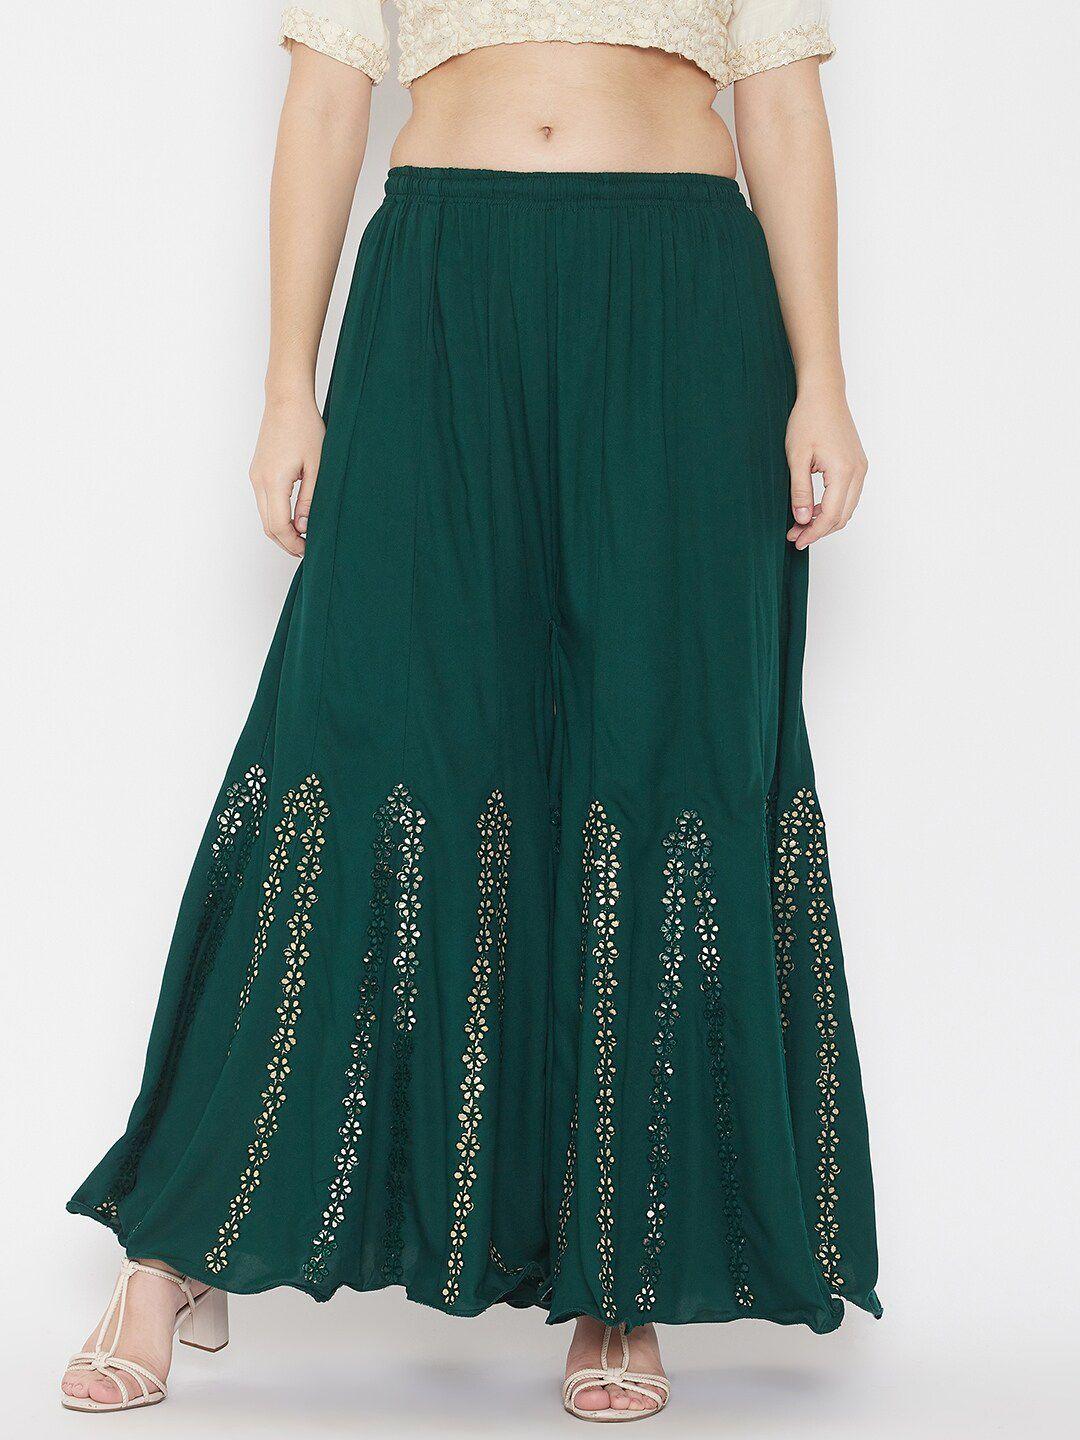 tulip-21-women-green-&-gold-toned-floral-embellished-flared-ethnic-palazzos